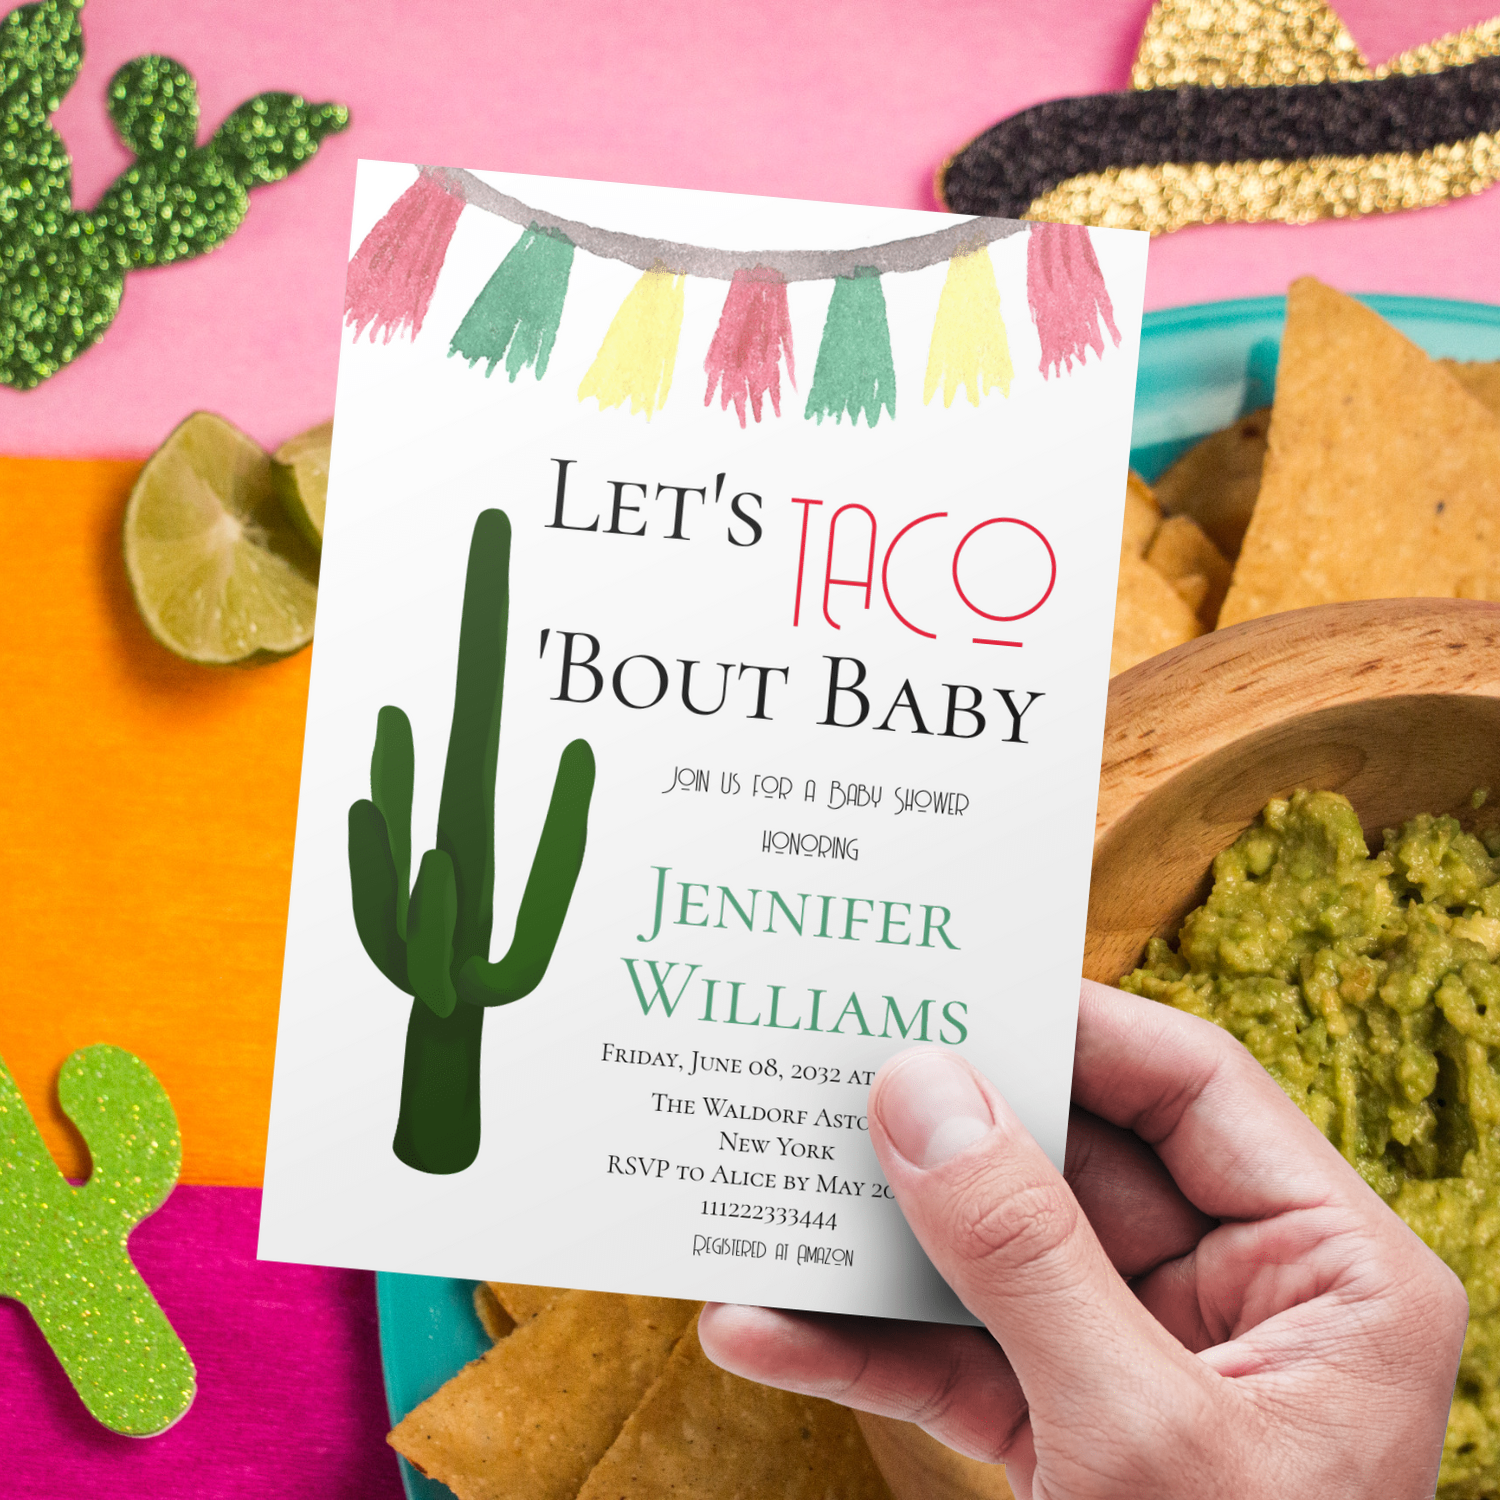 Elegant Mexican Fiesta Themed Baby Shower Invitation Let's Taco 'Bout Baby with traditional simple elements like Cactus and bright decor